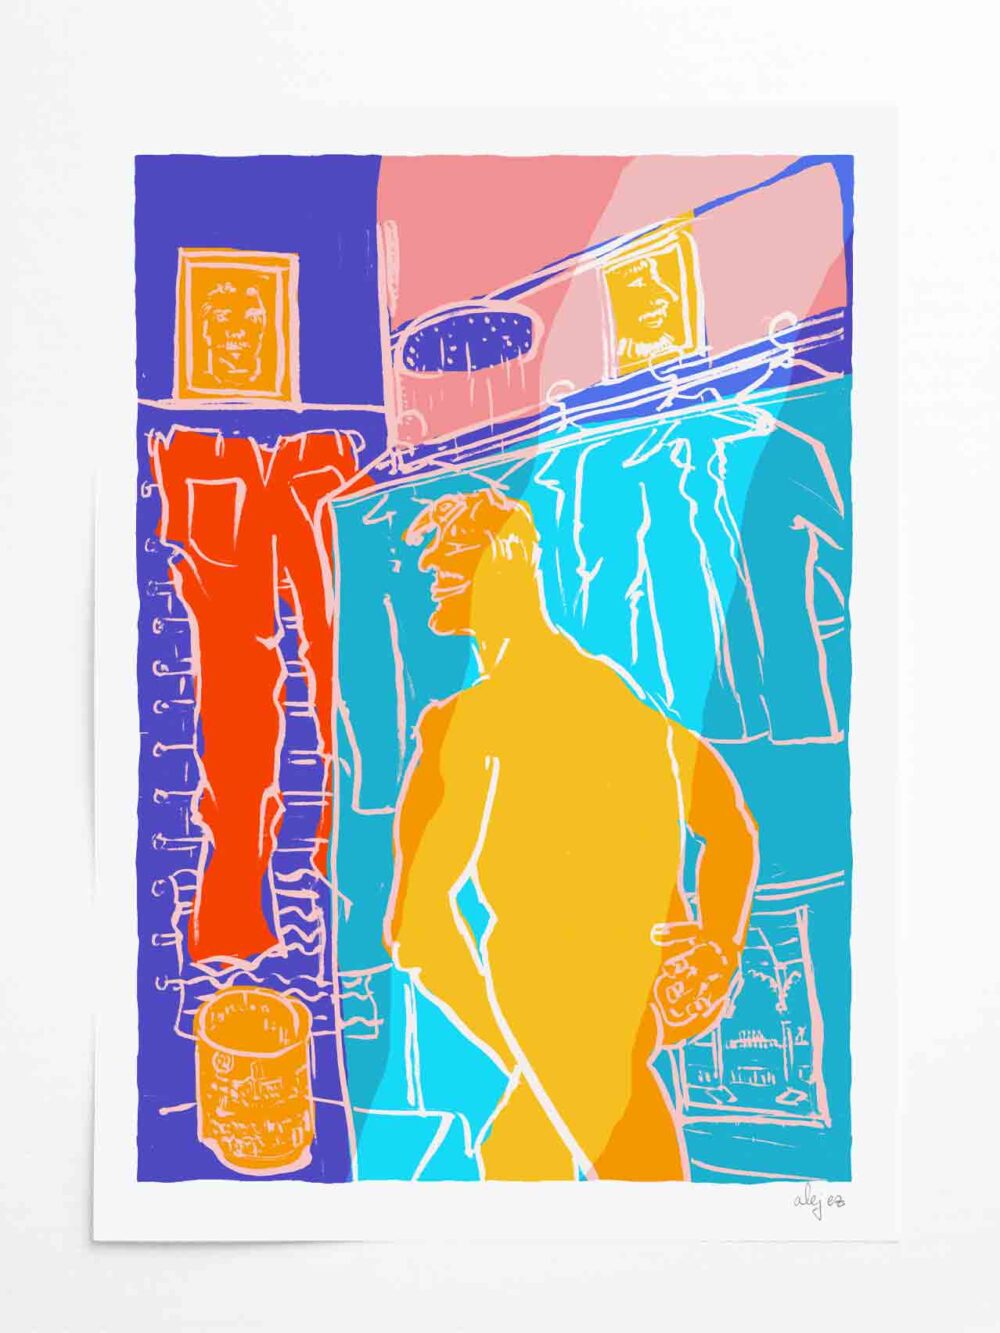 art print by artist alej ez titled Morning Shower on Laundry Day